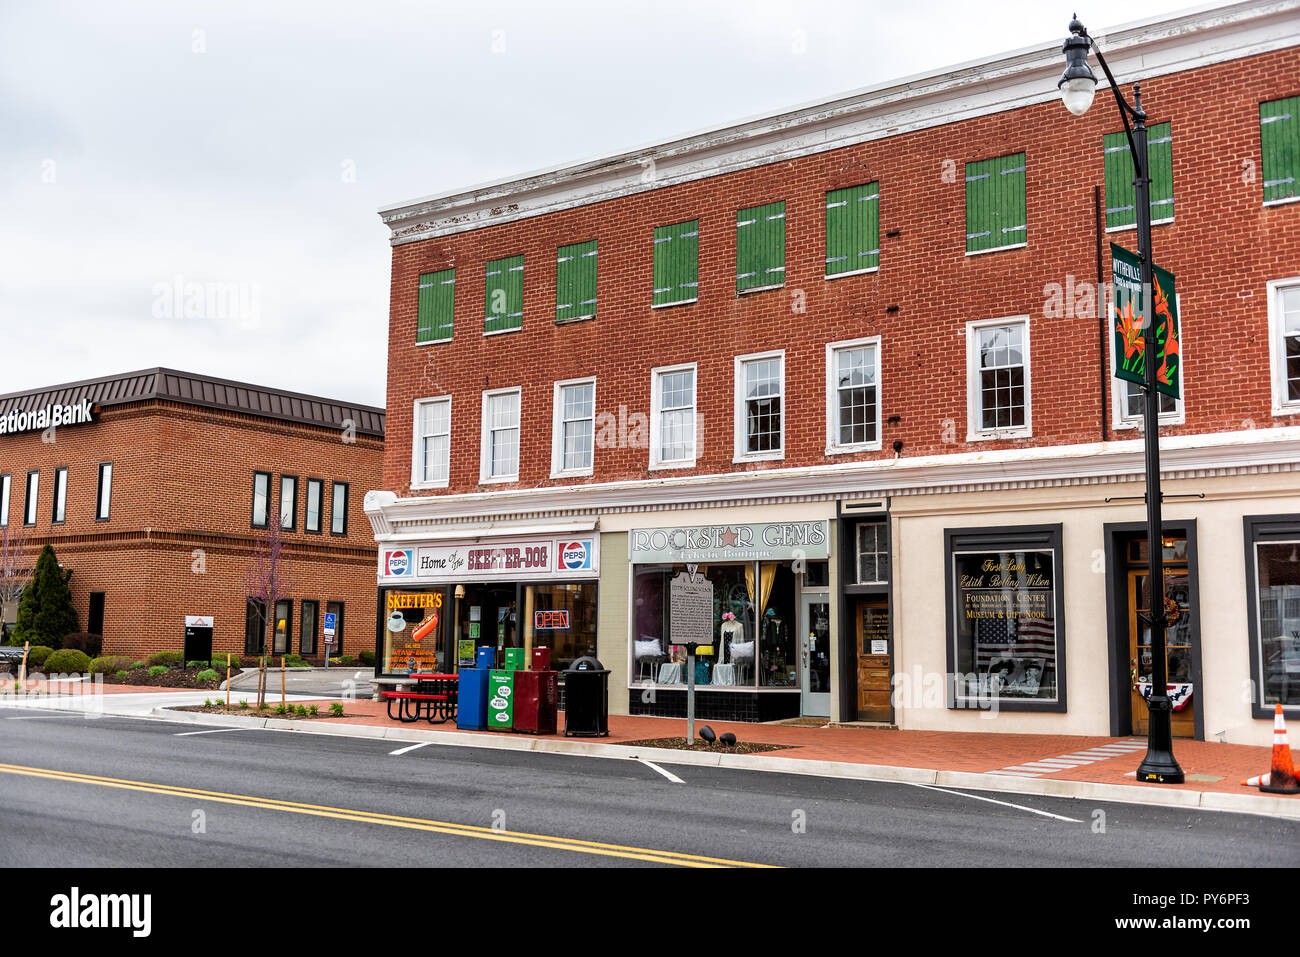 Wytheville, USA - April 19, 2018: Small town village signs for stores, shops, boutiques in southern south Virginia, historic brick buildings Stock Photo